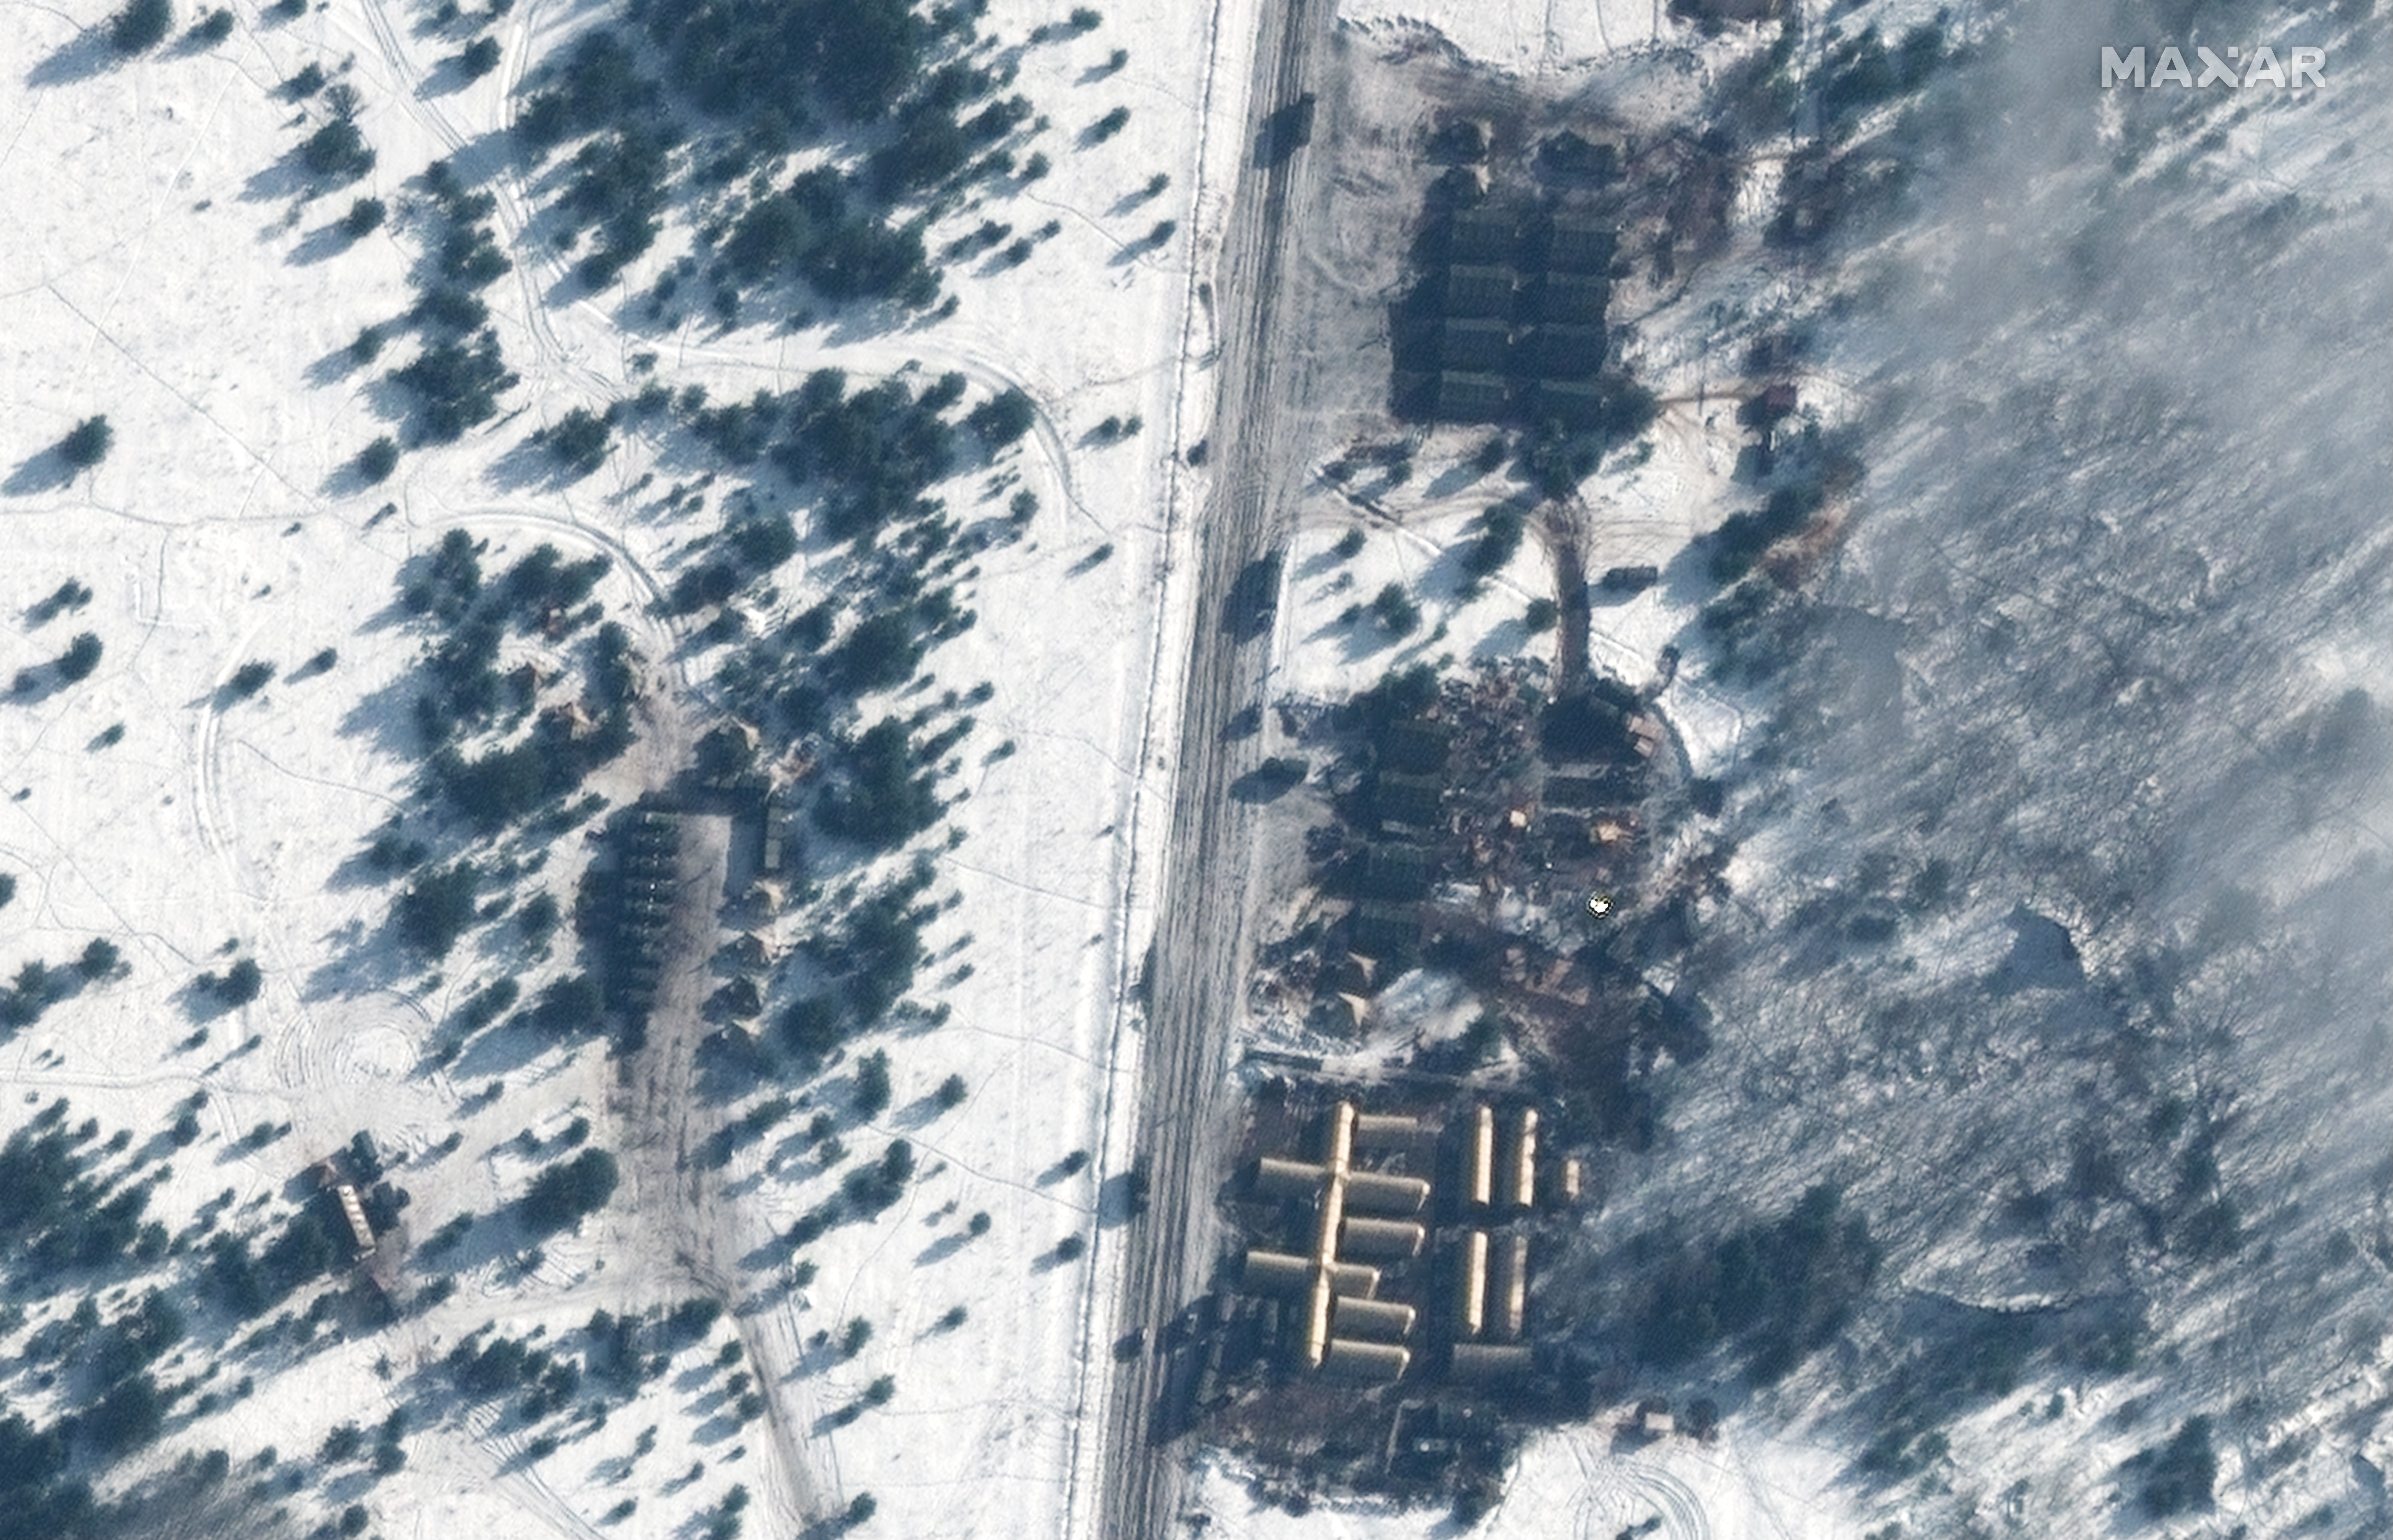 A satellite image of a troop housing area and field hospital at an airfield near Gomel, Belarus.